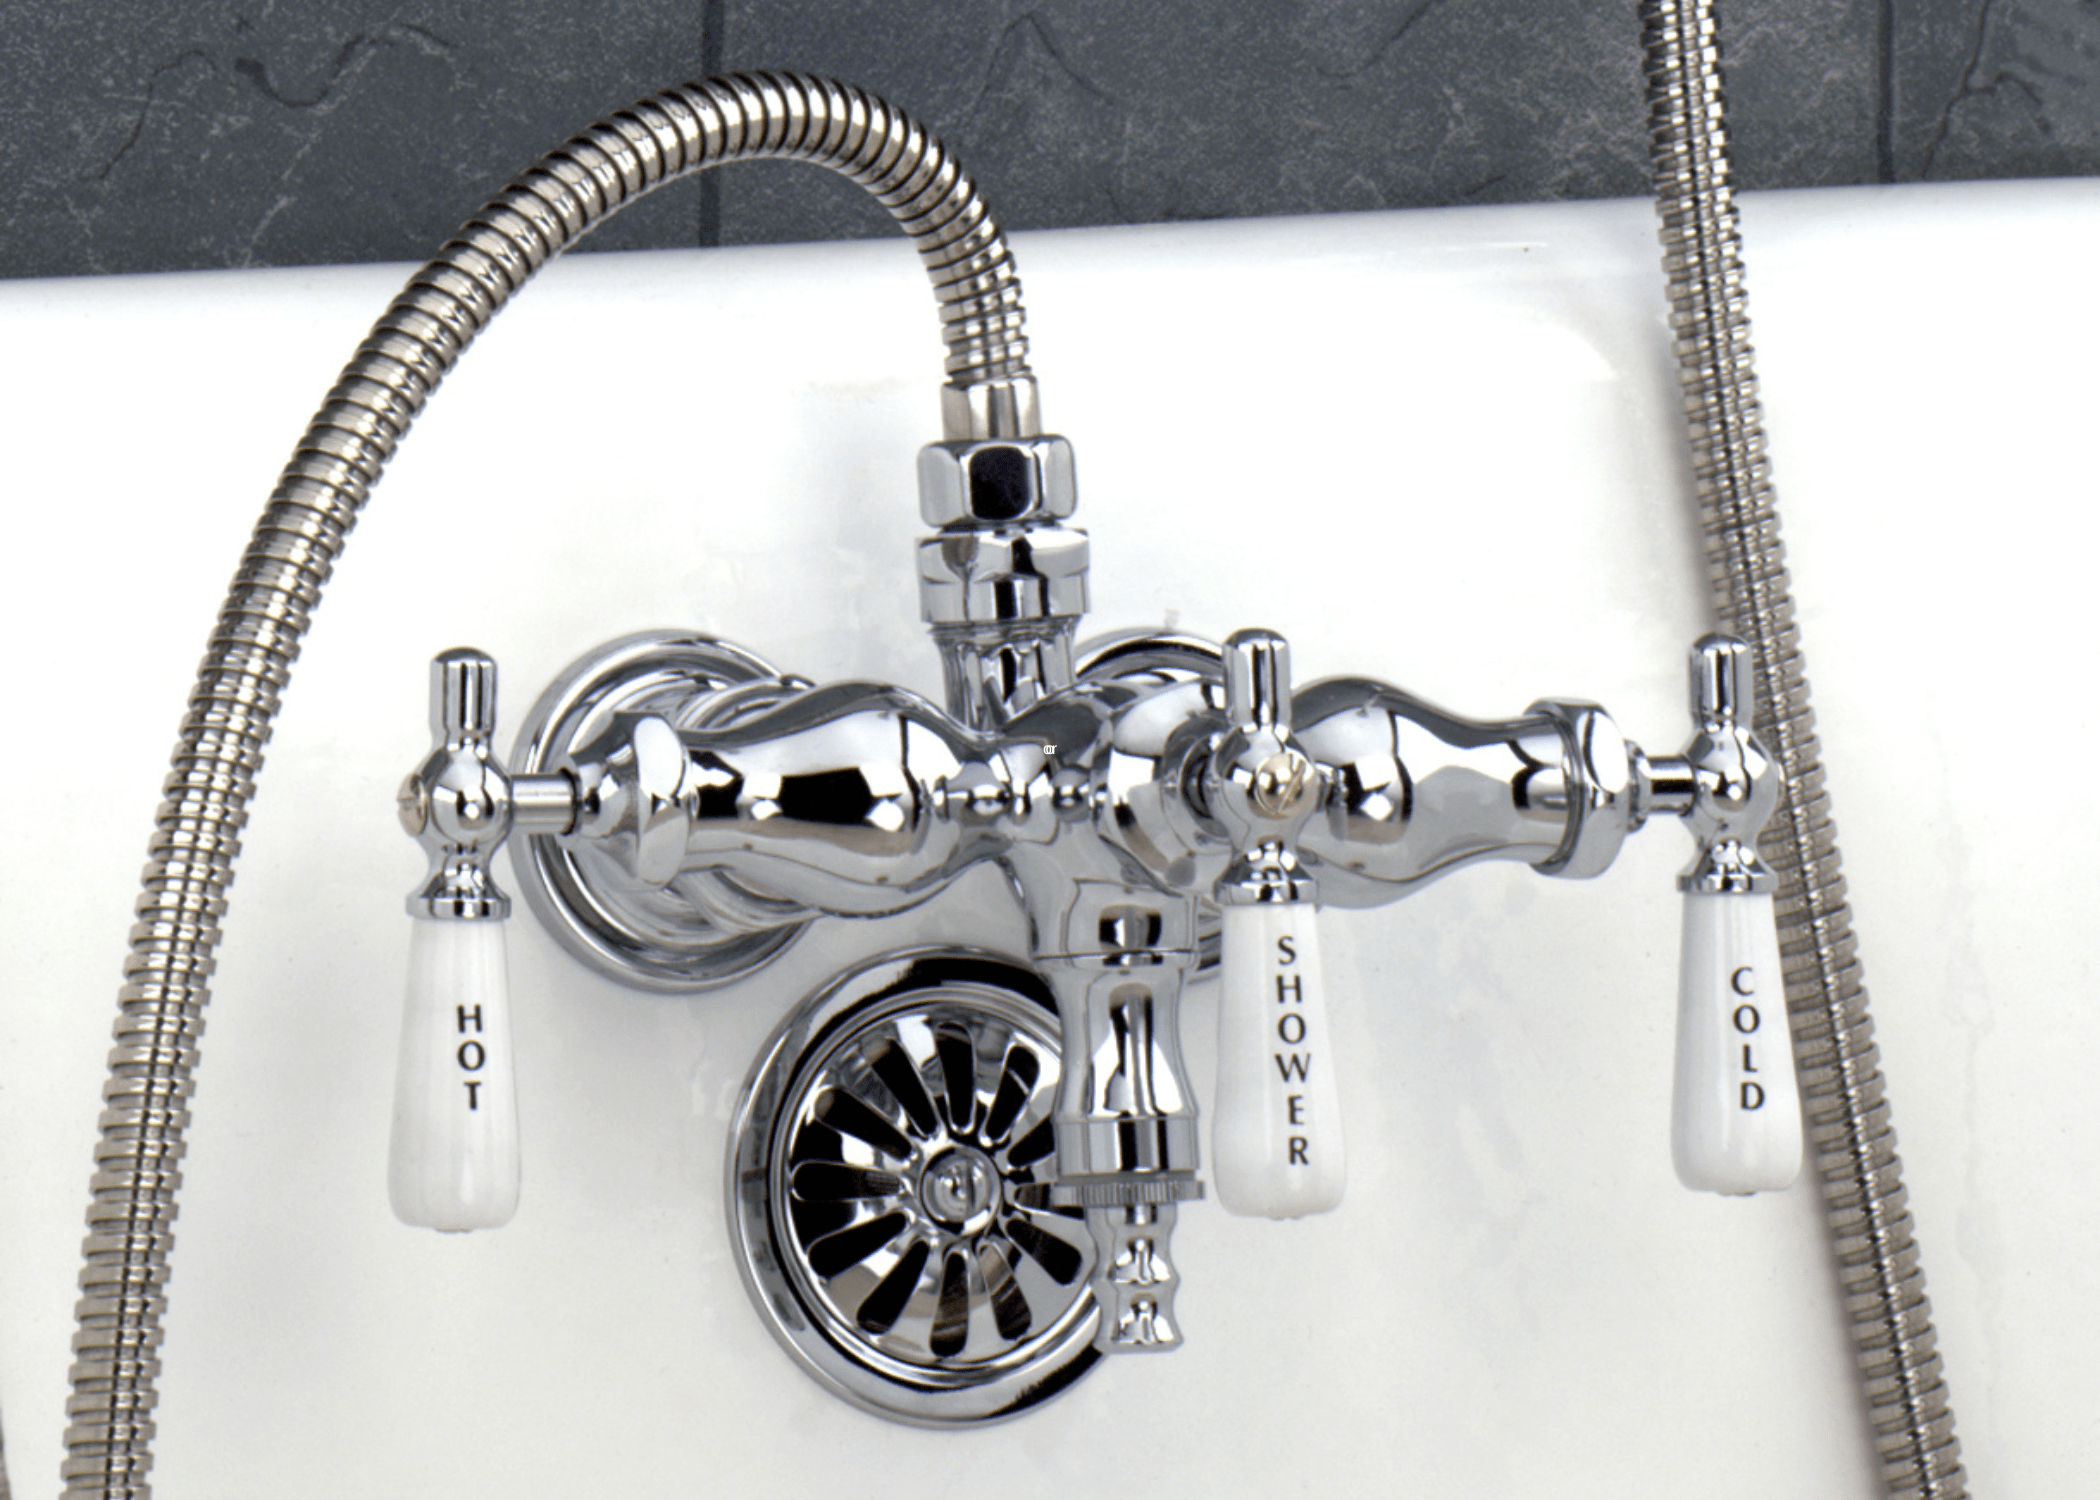 cartridge faucet in a shower